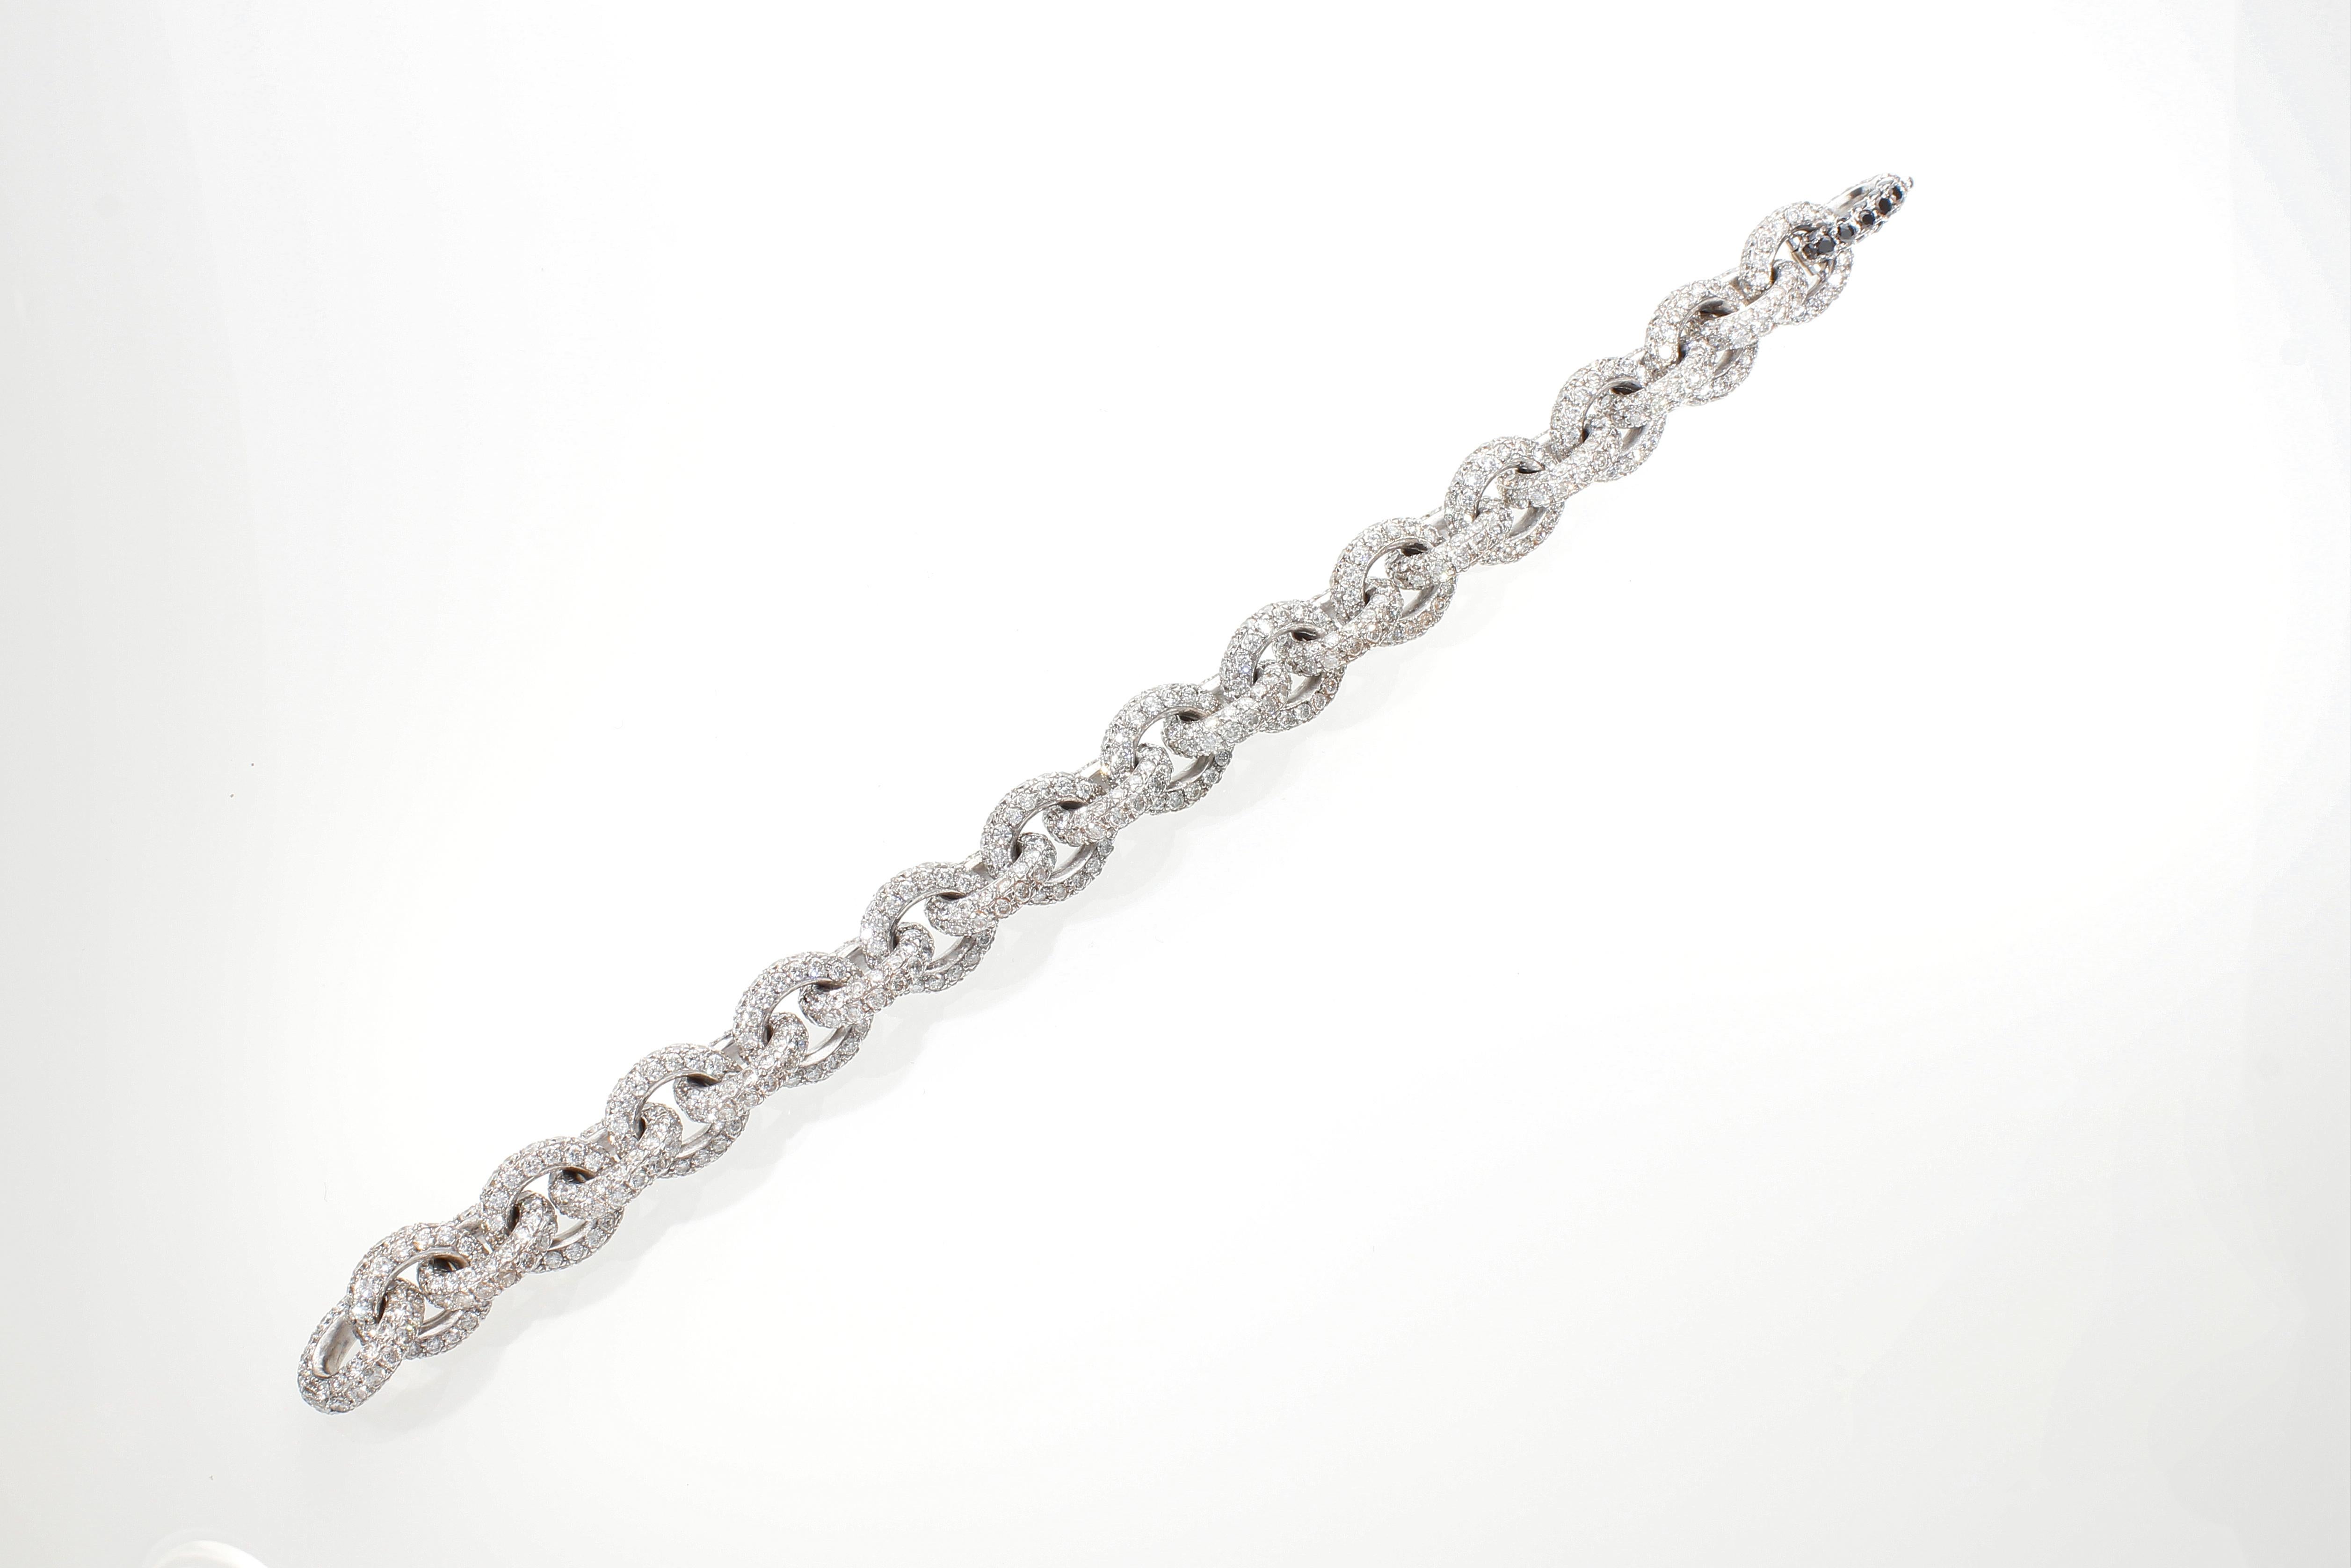 Chain Bracelet with 30.76 Ct of White Diamonds. Handmade. Made in Italy For Sale 1